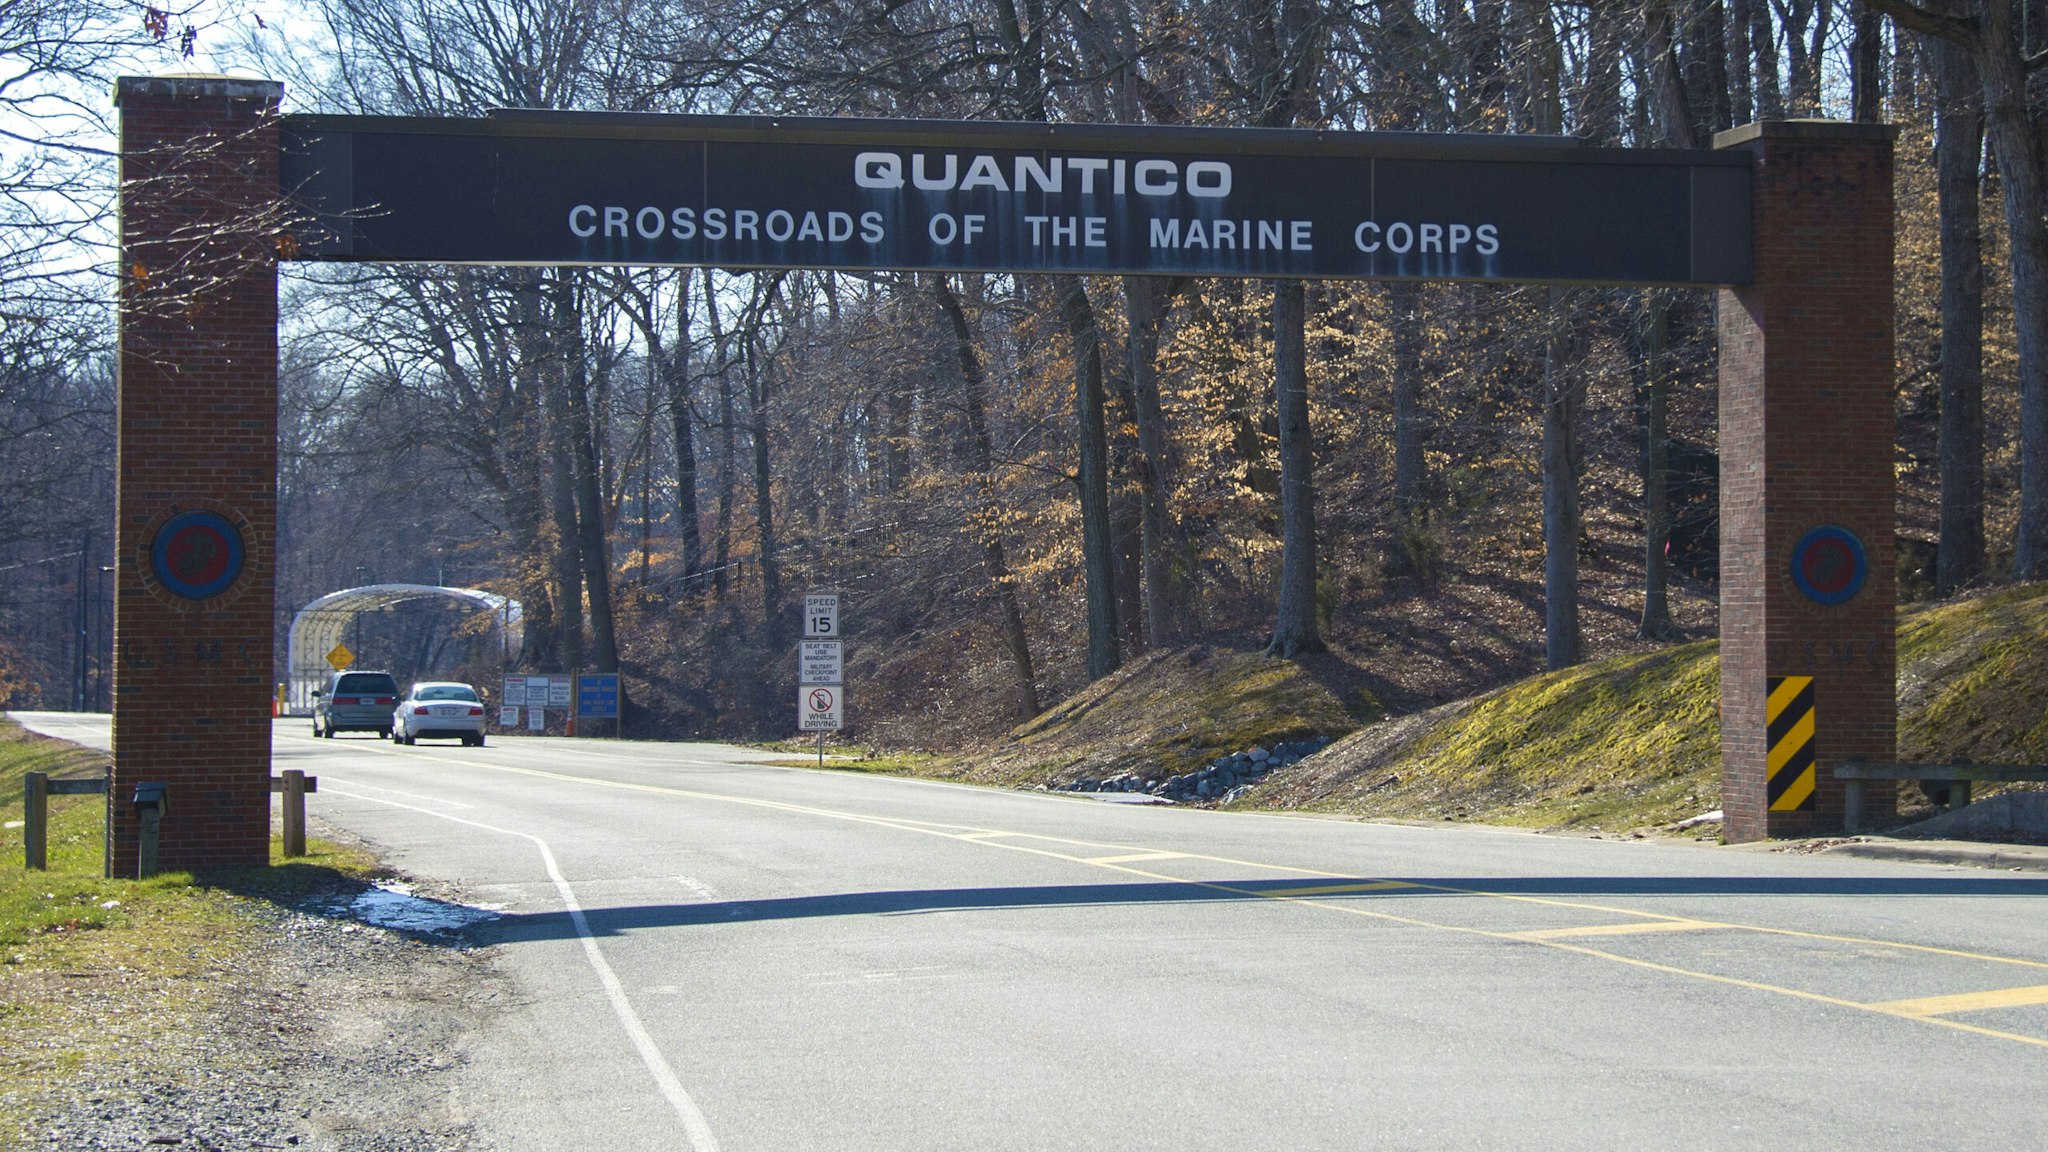 The main gate of the US Marine Corps Base in Quantico, Virginia, on March 22, 2013. A US Marine shot and killed two colleagues late March 21, 2013 before apparently turning the gun on himself at the base, the US Defense Department said on March 22. The suspected shooter and the victims were Marines who worked at an officer candidate school at the base, said base spokesman Sergeant Christopher Zahn.